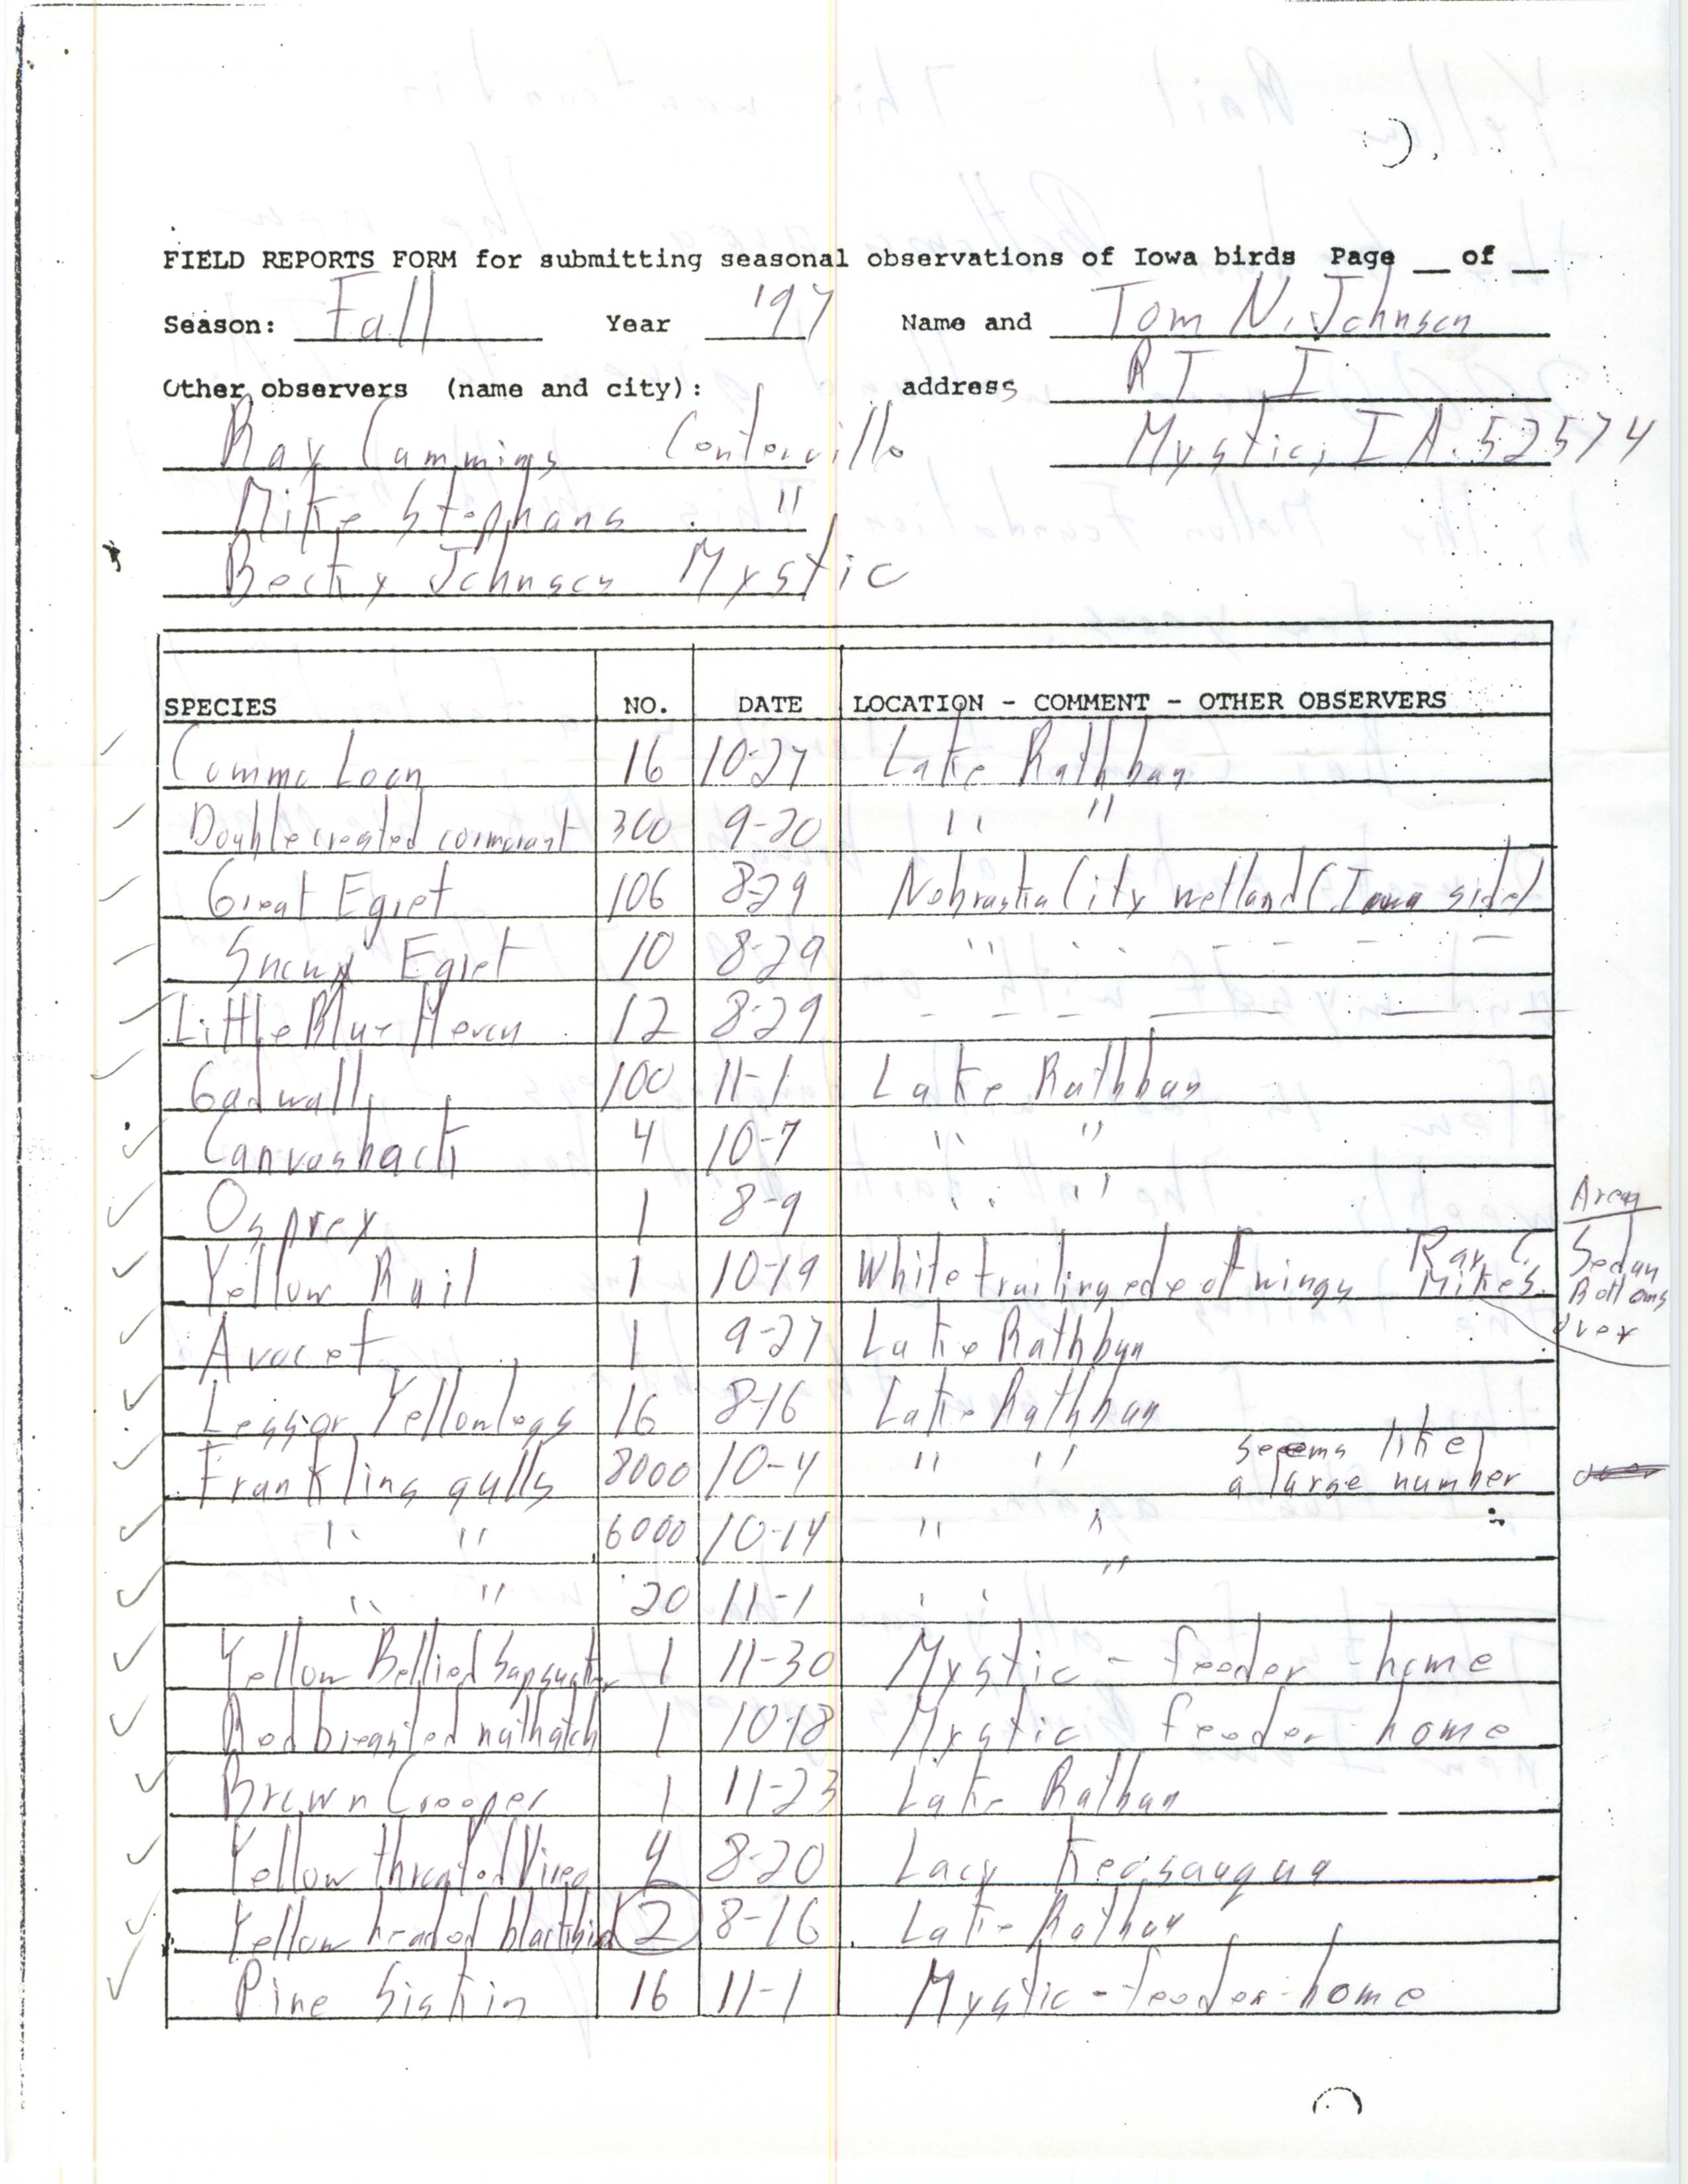 Field reports form for submitting seasonal observations of Iowa birds, Thomas N. Johnson, fall 1997